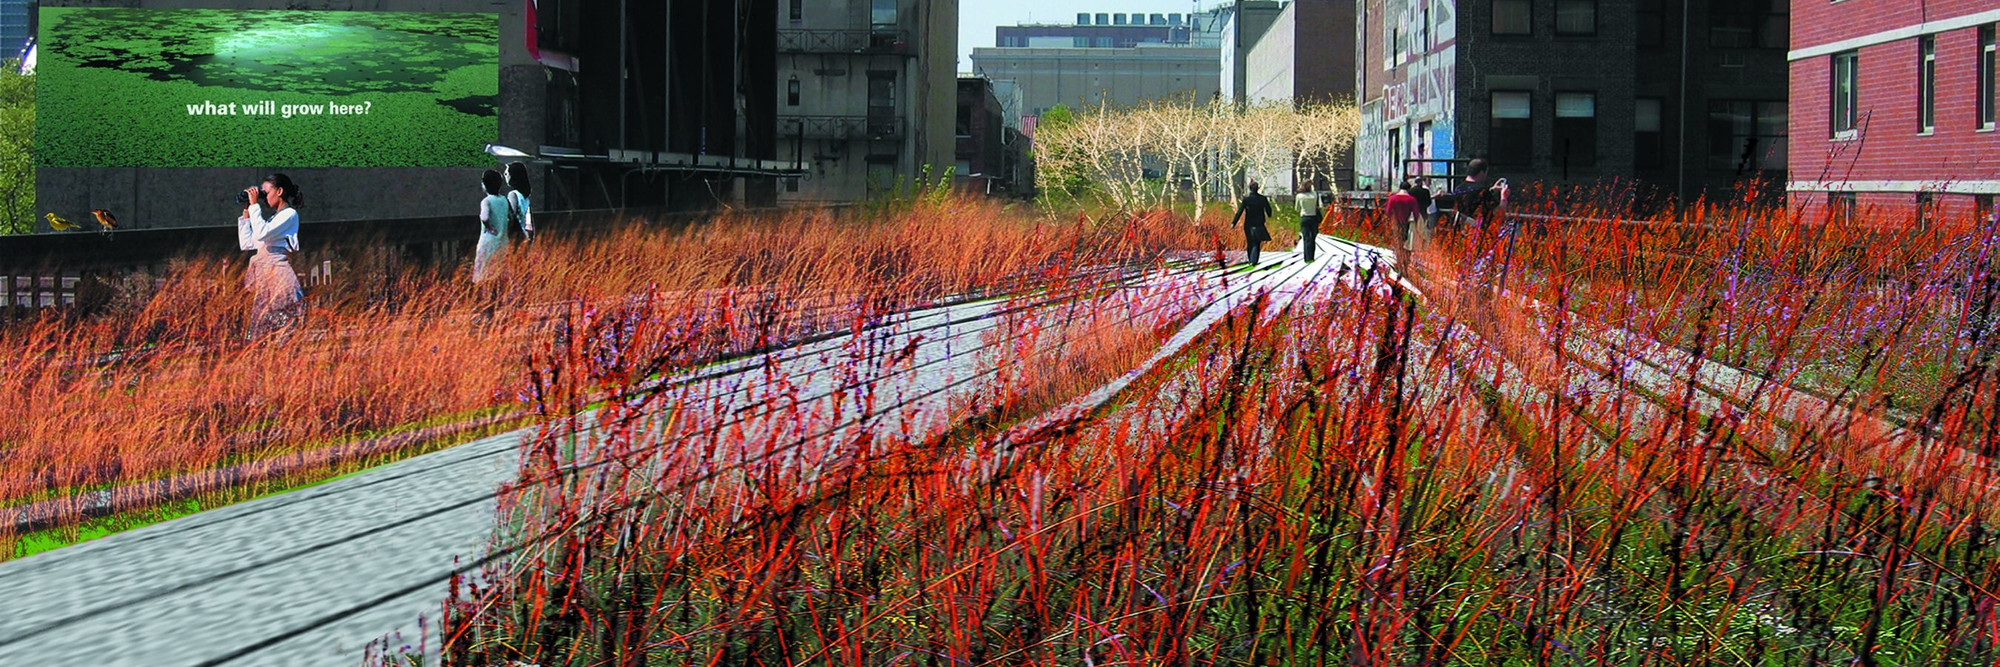 Field Operations and Diller Scofidio + Renfro. The High Line, New York, New York. 2004–05. Perspective of grasslands and planking system, 2004